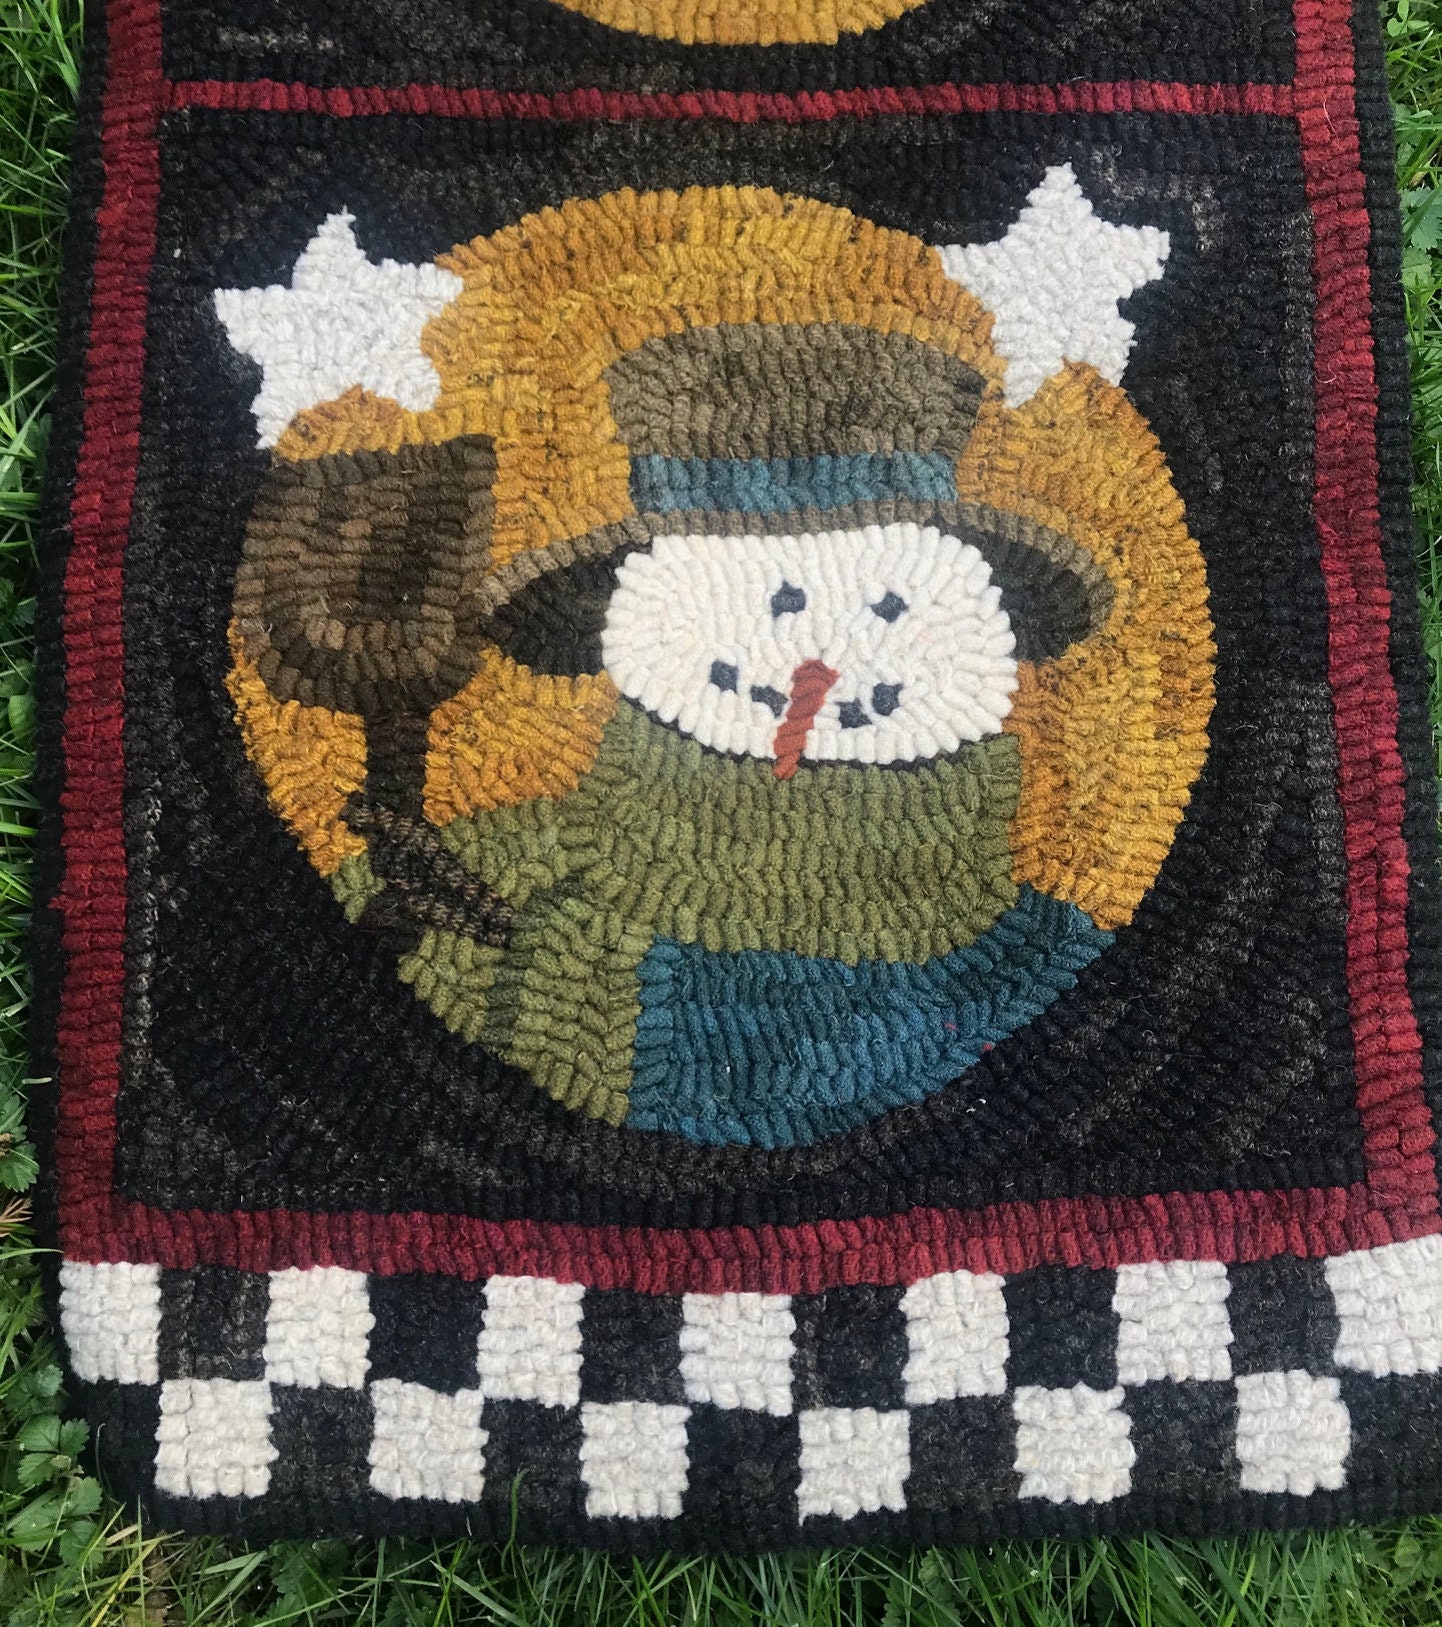 Snow People Rug Hooking Pattern Designed by Therese Shick - Etsy